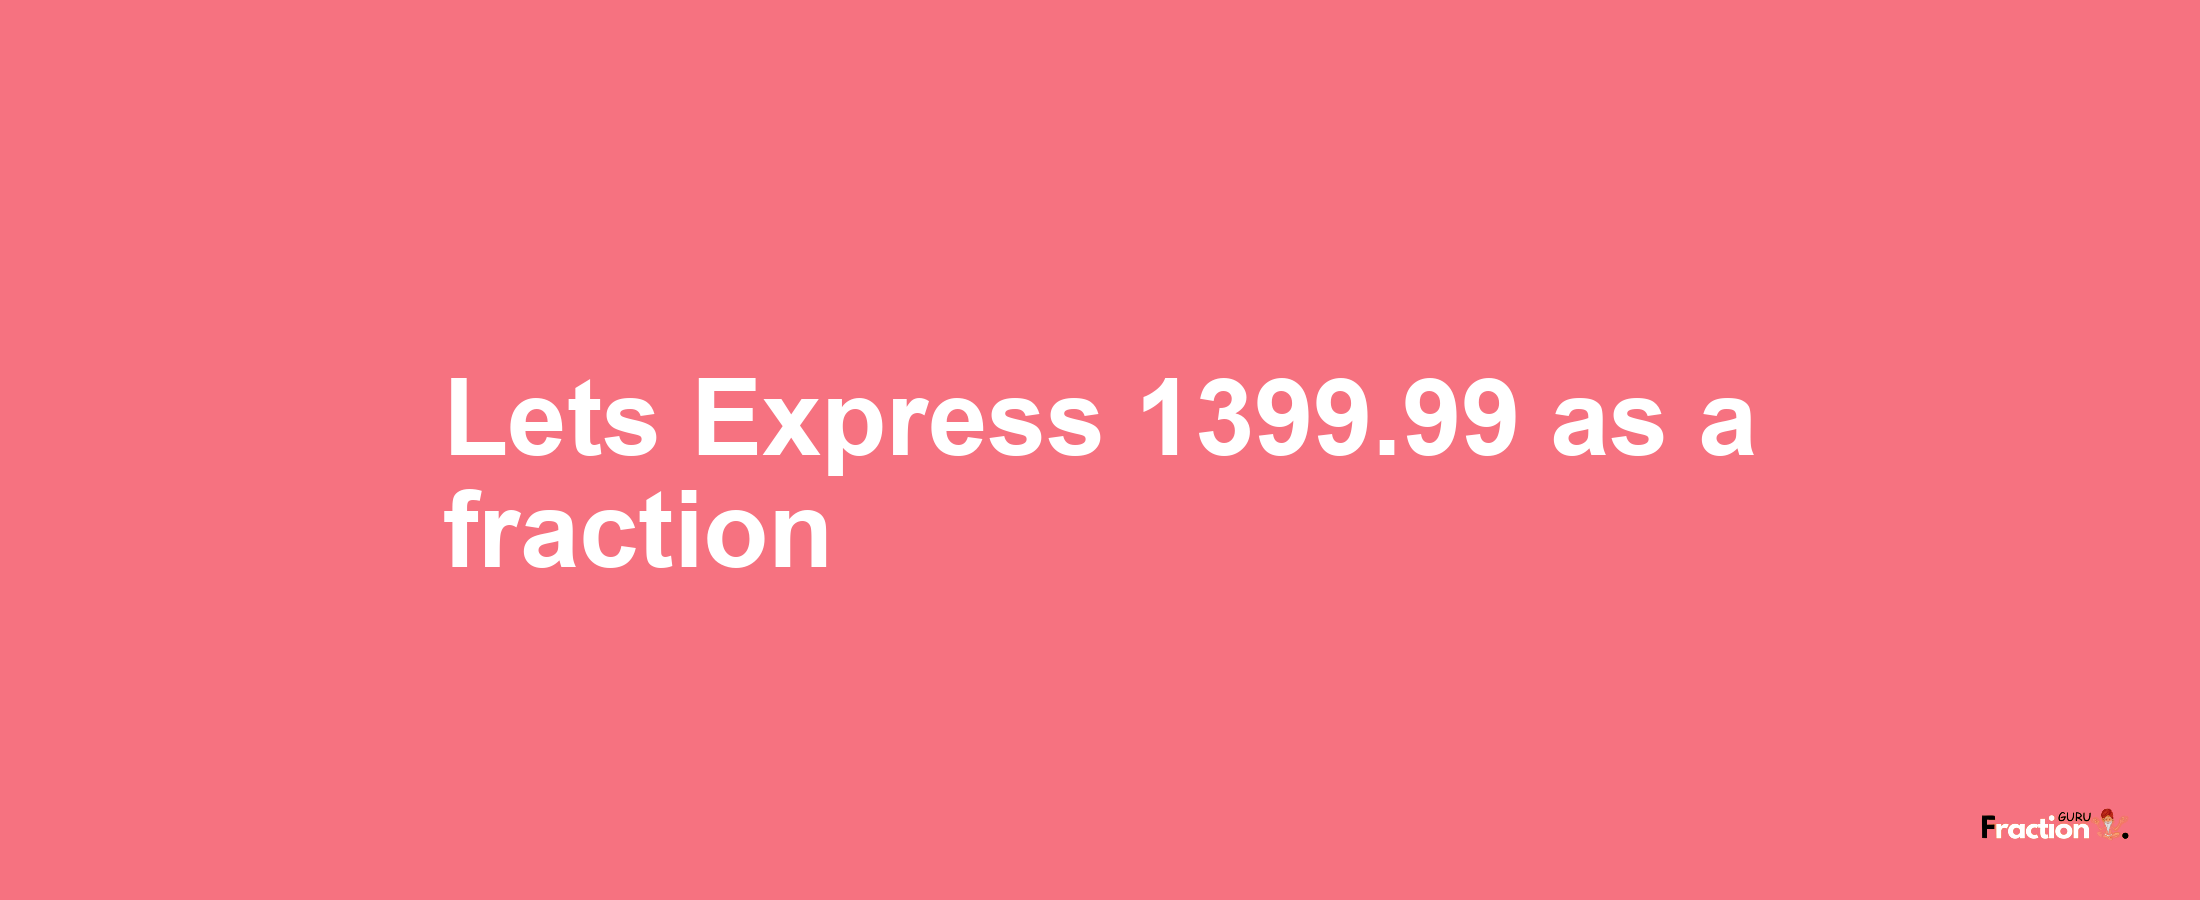 Lets Express 1399.99 as afraction